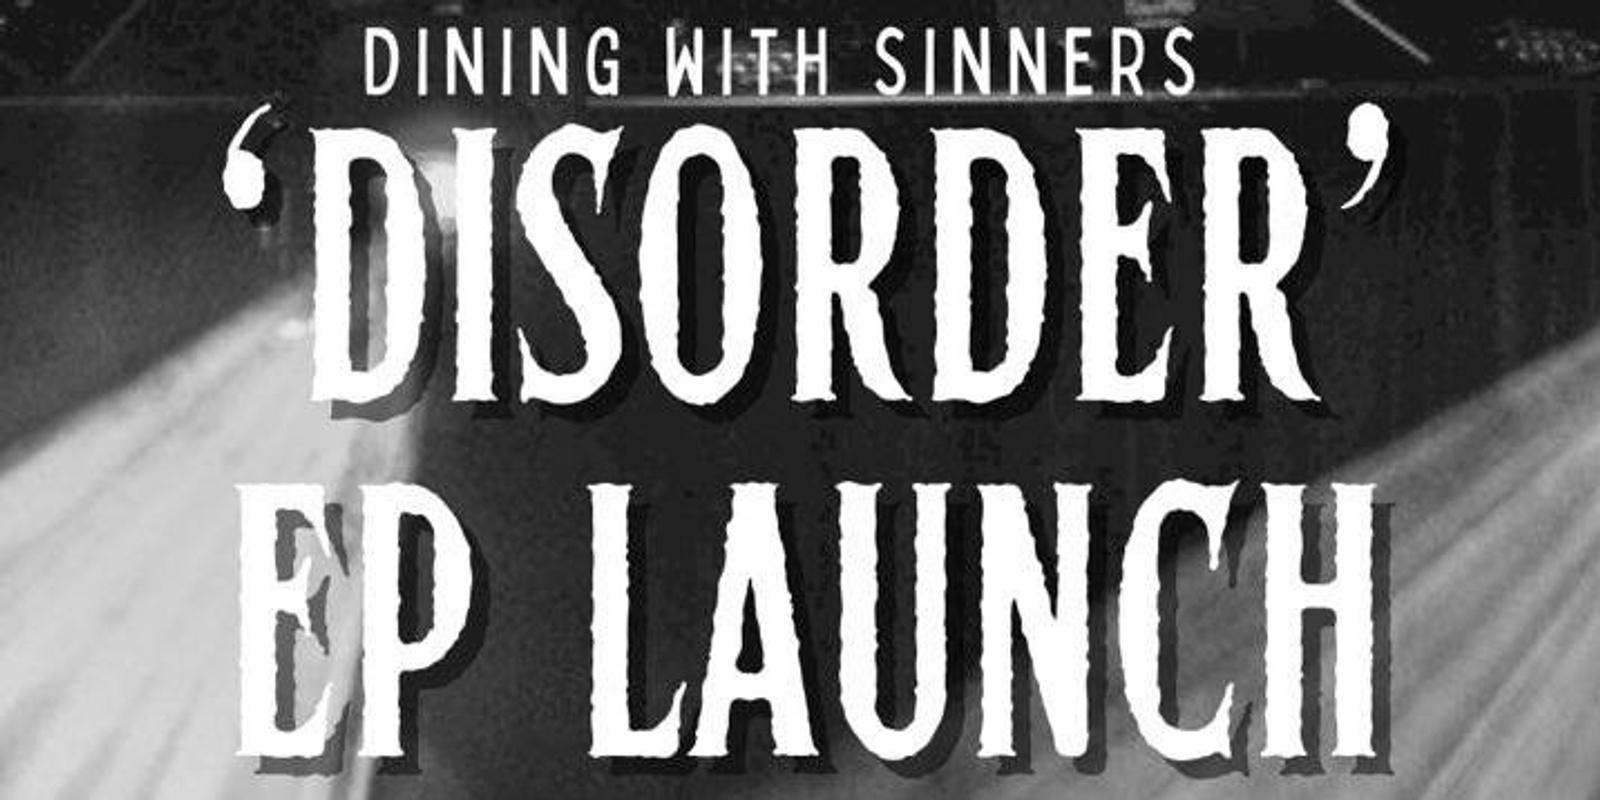 Banner image for Dining With Sinners 'Disorder' EP Launch